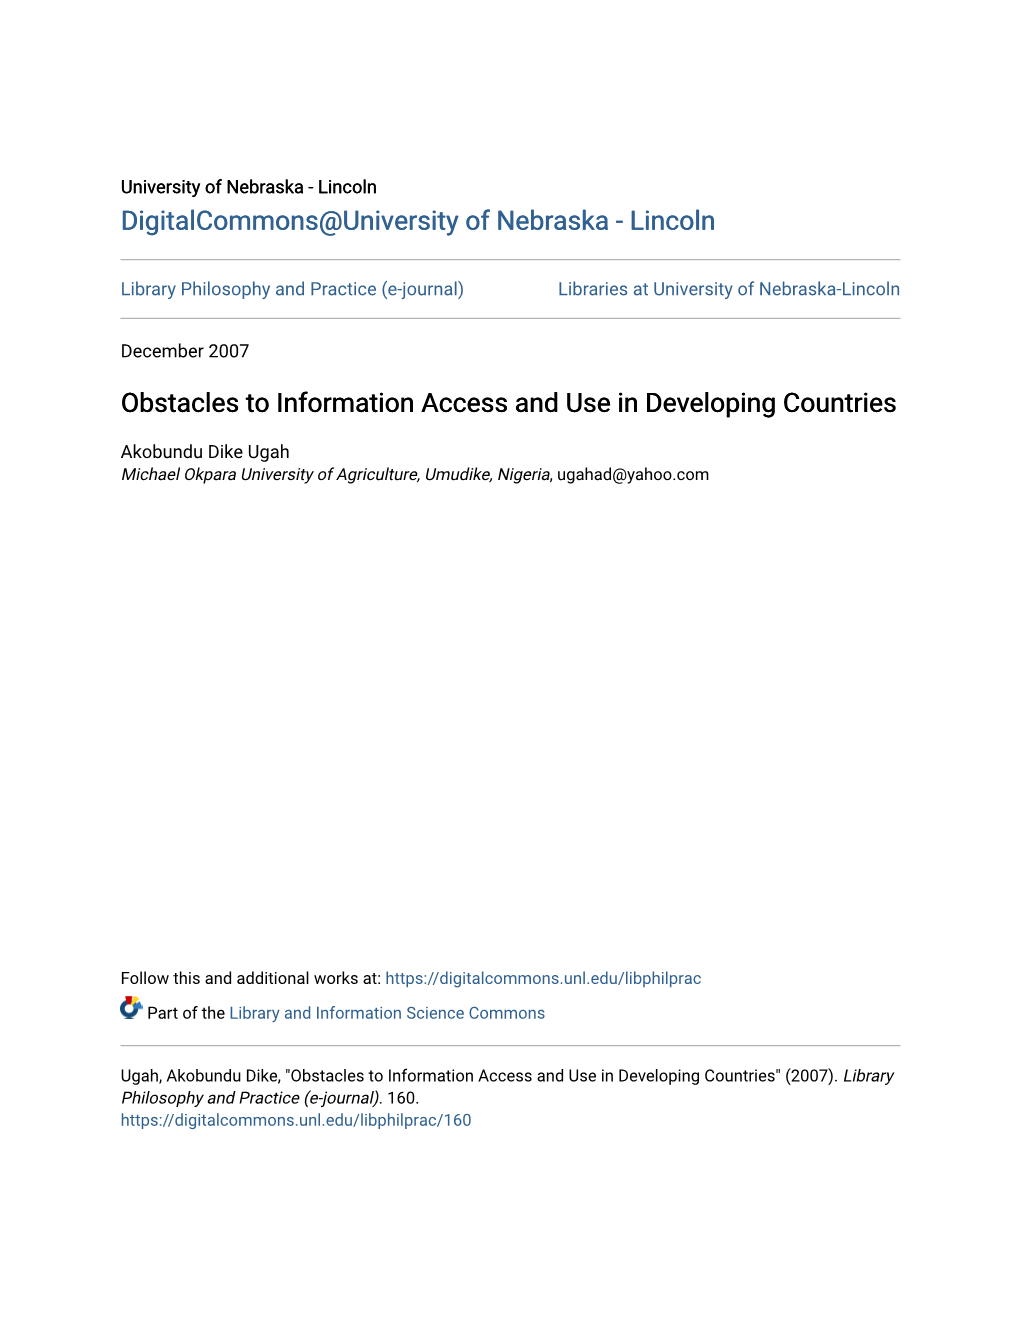 Obstacles to Information Access and Use in Developing Countries